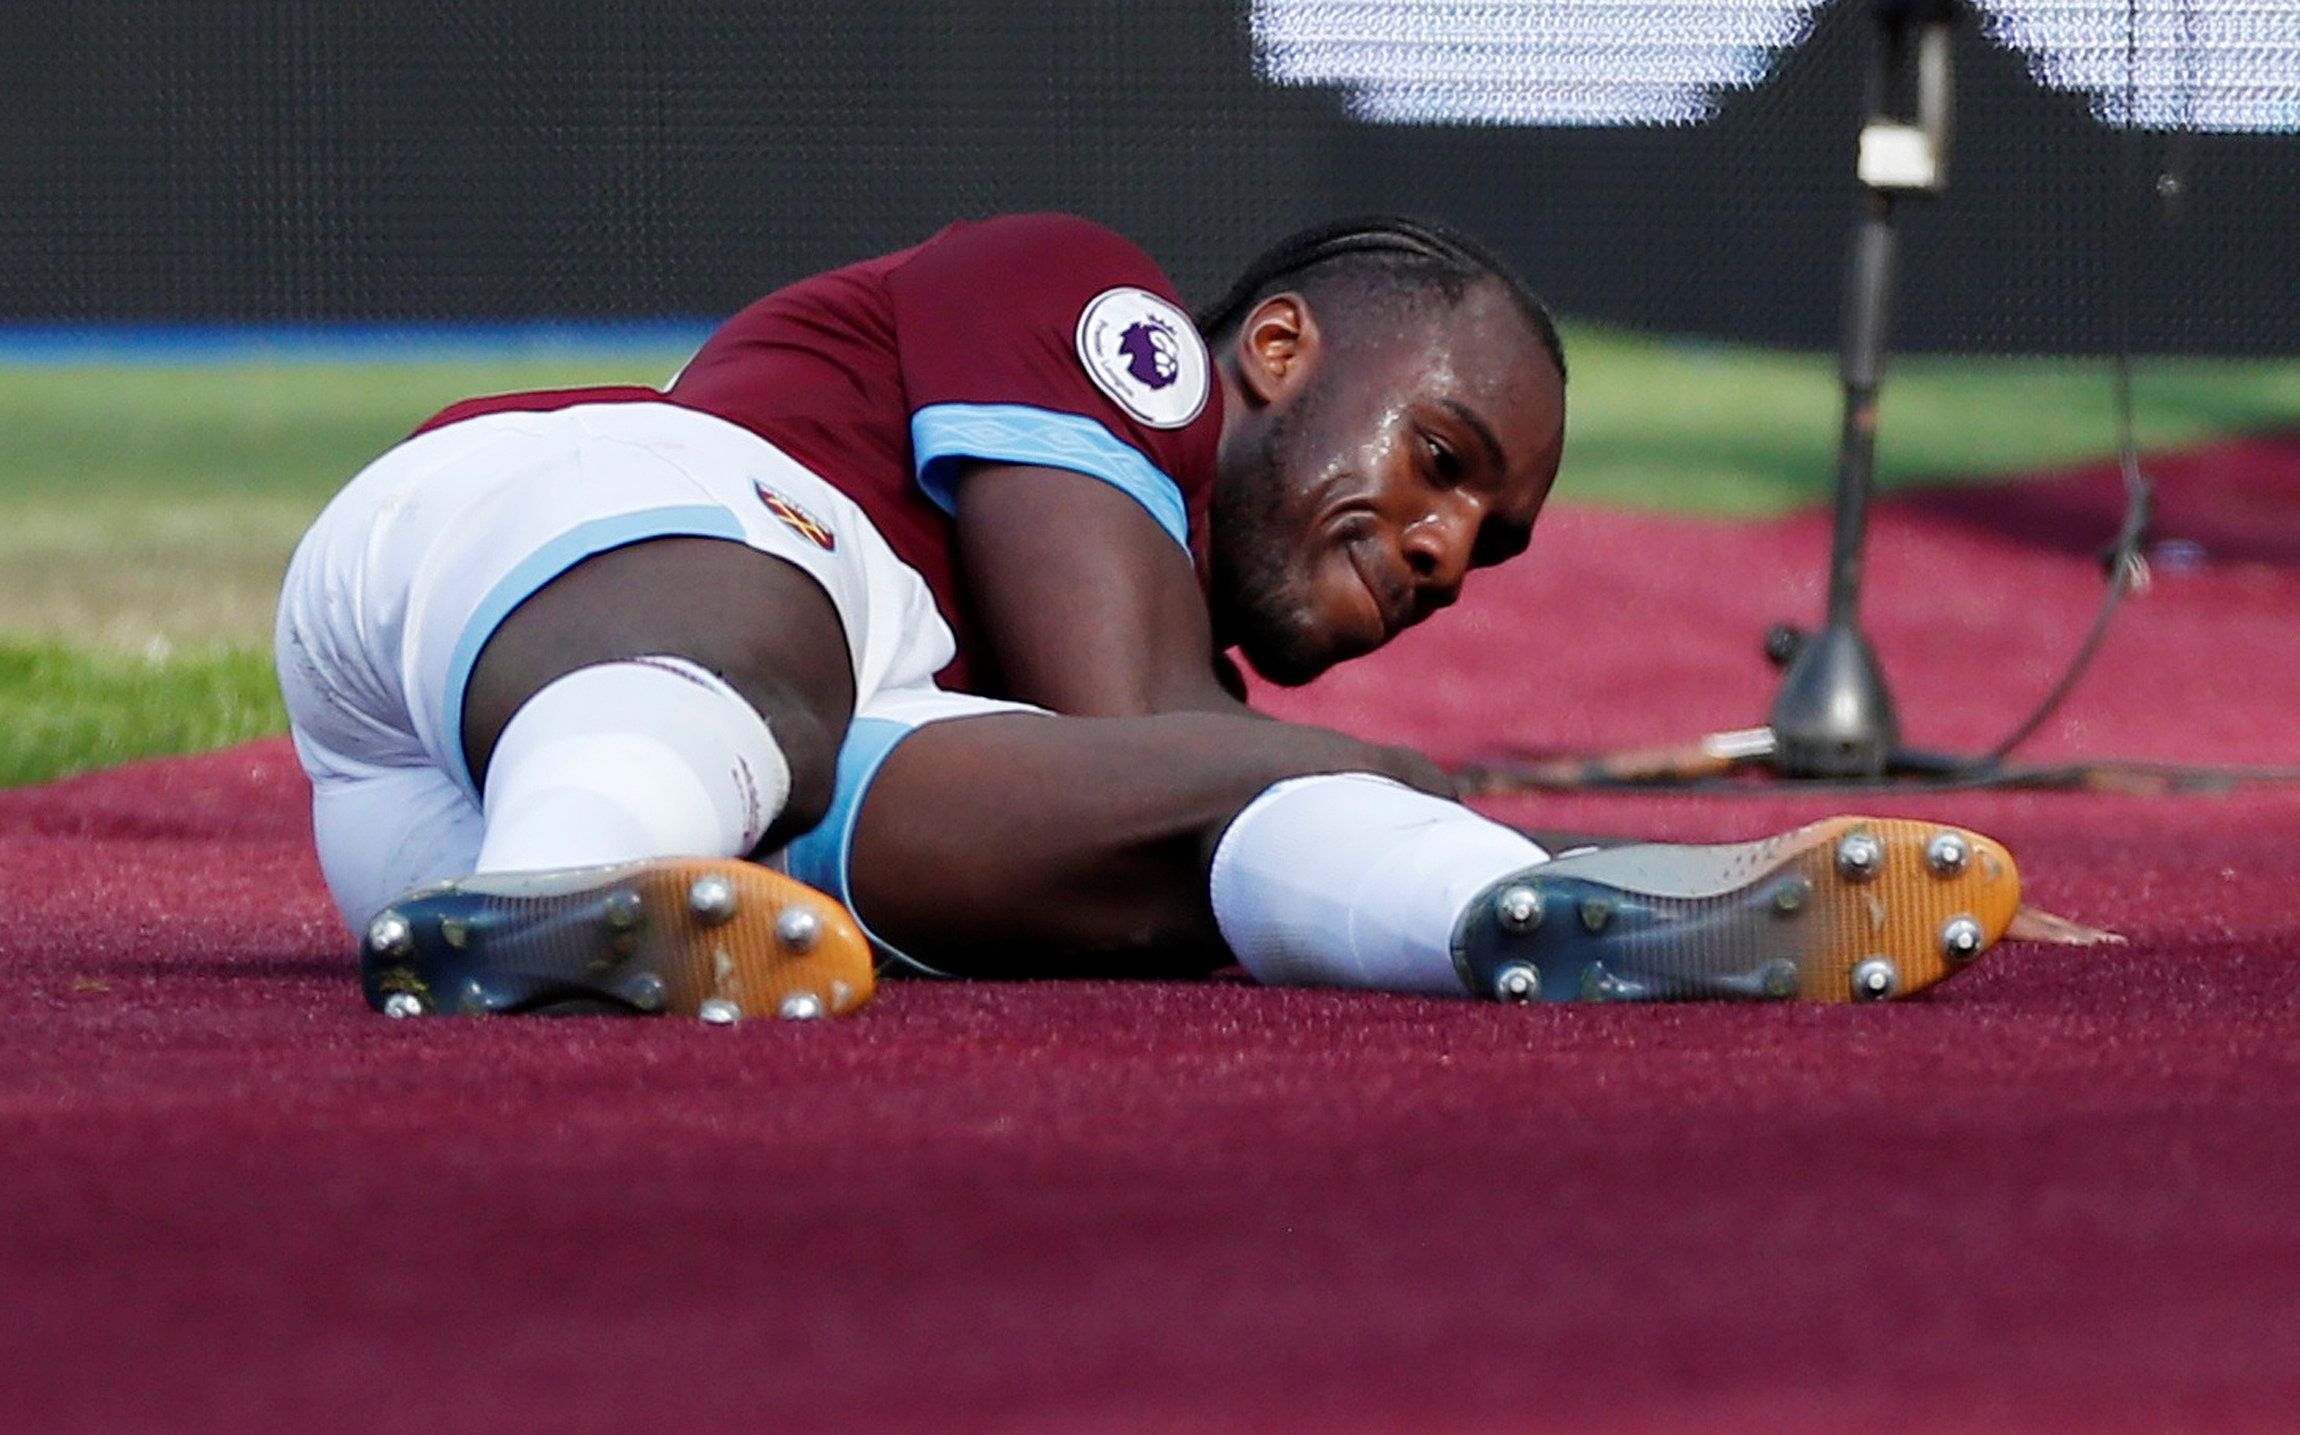 Soccer Football - Premier League - West Ham United v Leicester City  - London Stadium, London, Britain - April 20, 2019  West Ham's Michail Antonio     Action Images via Reuters/Andrew Boyers  EDITORIAL USE ONLY. No use with unauthorized audio, video, data, fixture lists, club/league logos or 